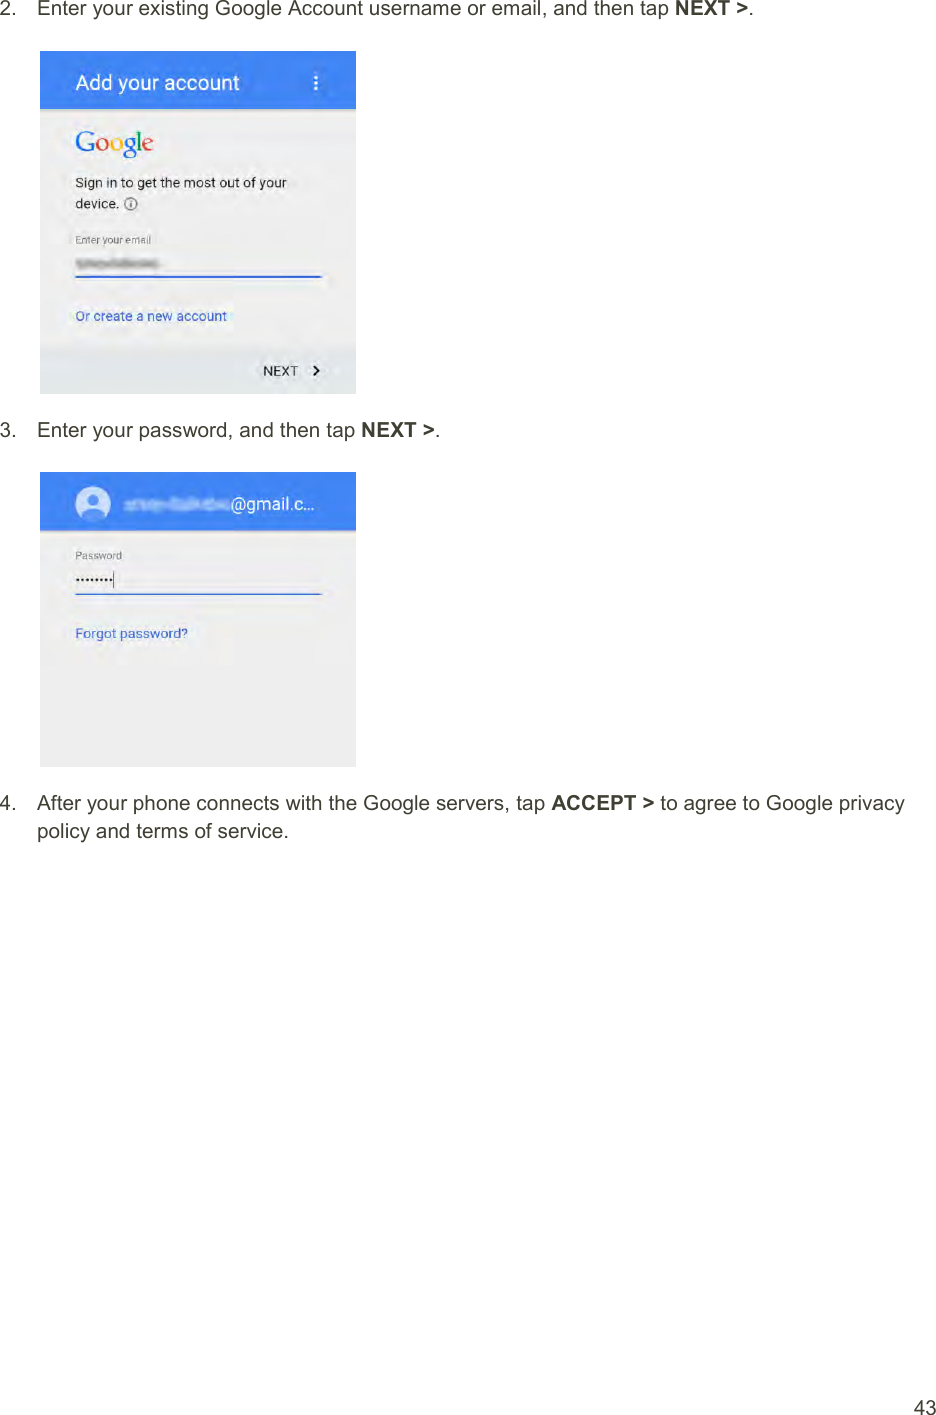  43 2.  Enter your existing Google Account username or email, and then tap NEXT &gt;.   3.  Enter your password, and then tap NEXT &gt;.   4.  After your phone connects with the Google servers, tap ACCEPT &gt; to agree to Google privacy policy and terms of service. 